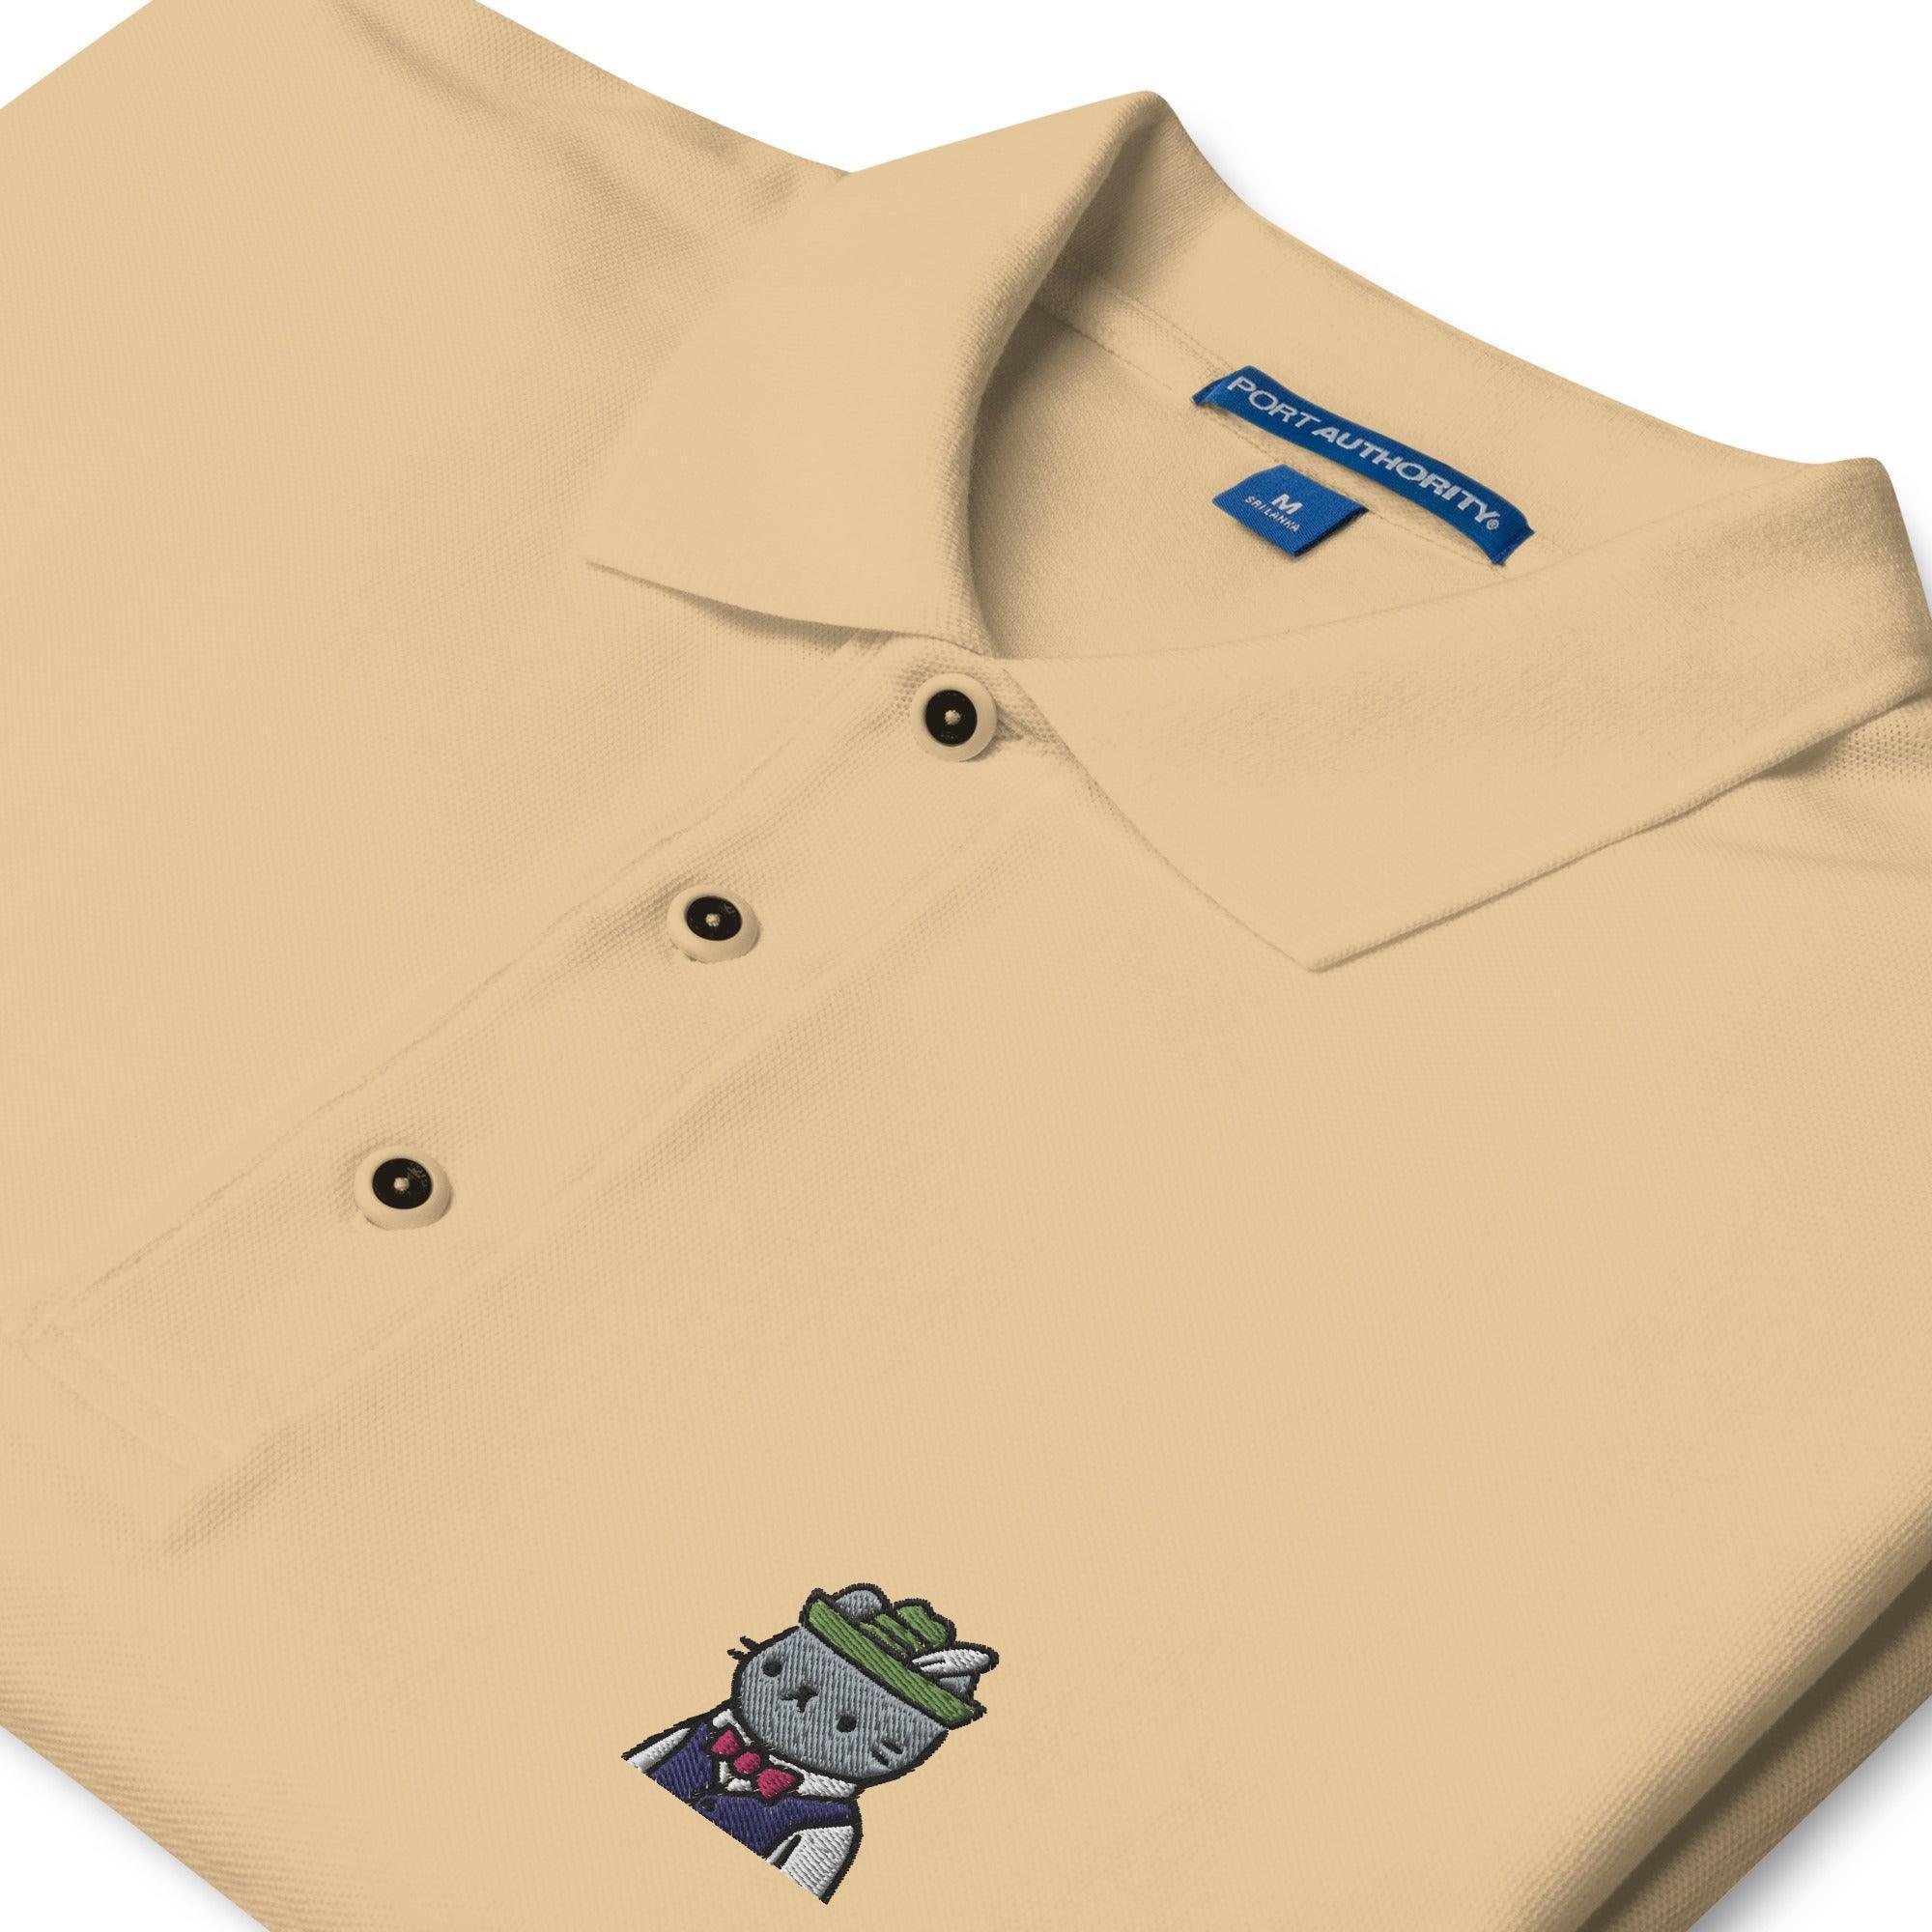 Cool Cats P2 Polo Shirt - InvestmenTees